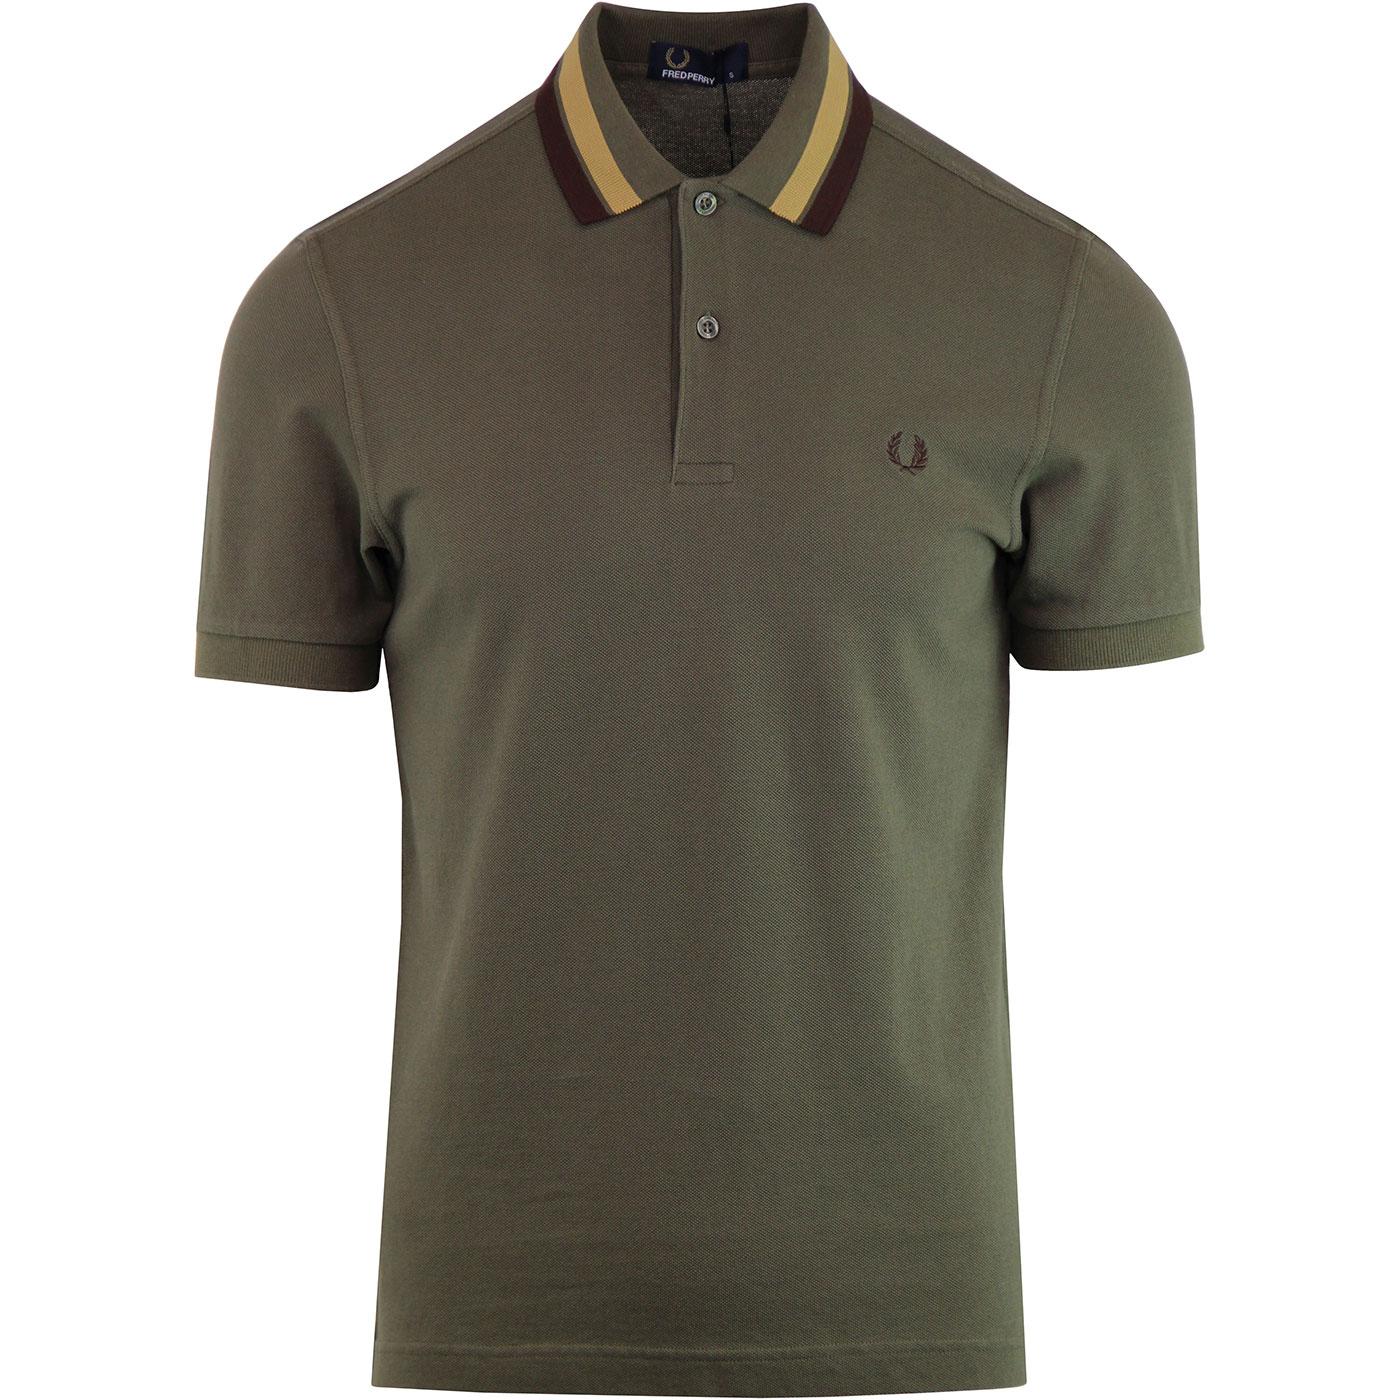 FRED PERRY Men's Mod Bold Tipped Pique Polo in Iris Leaf